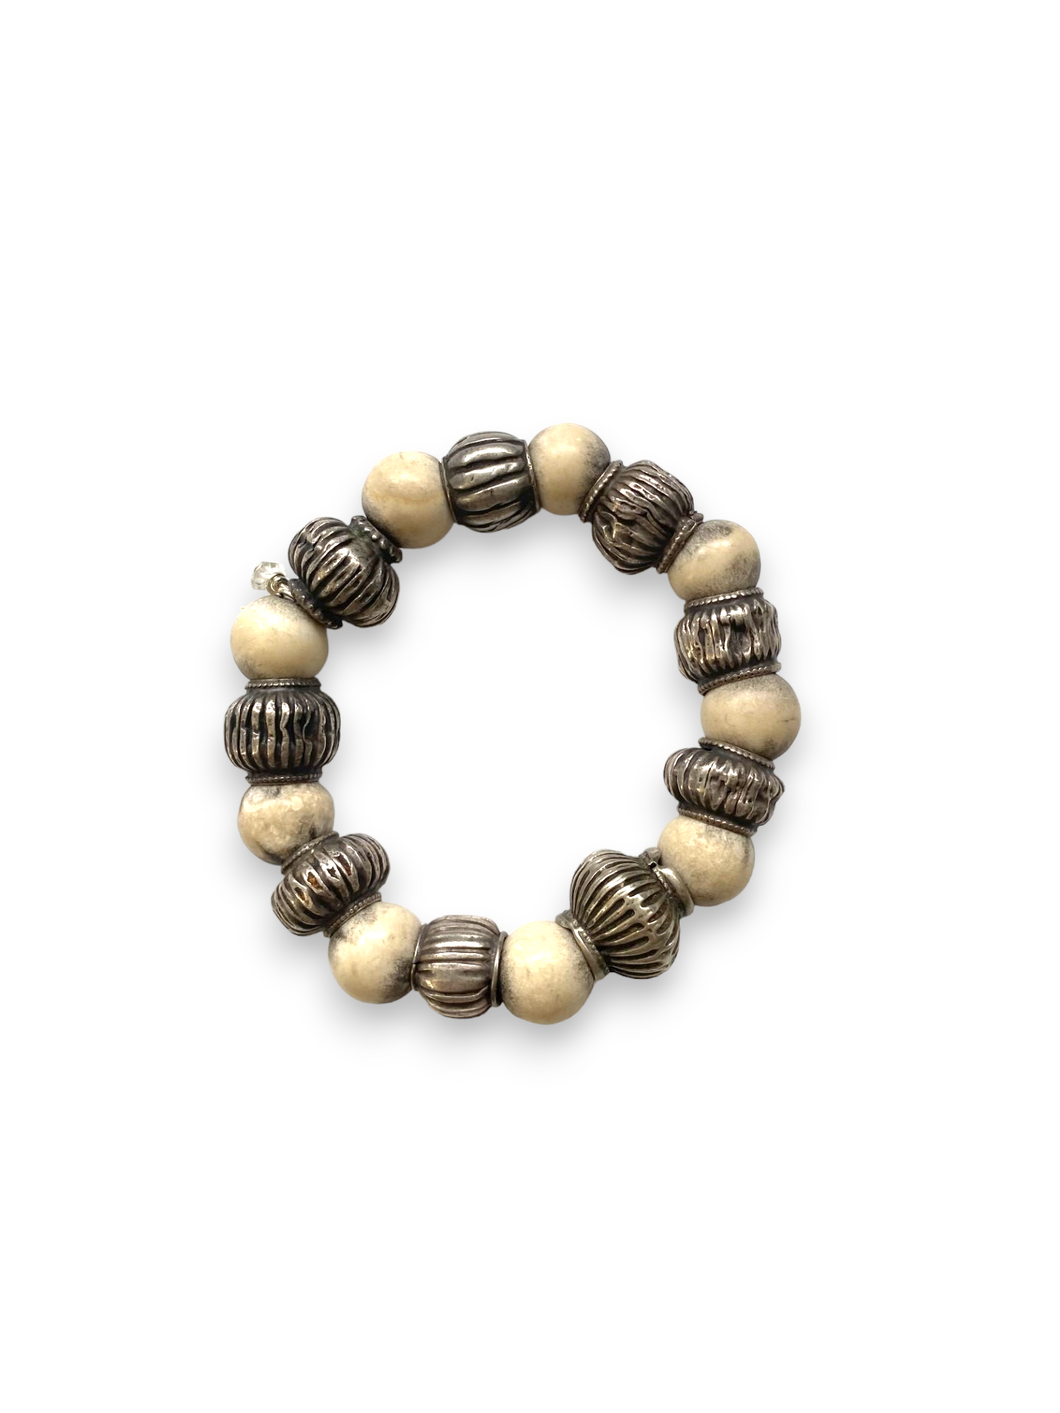 White Matte Jade Beads Bracelet w/Antique Sterling  Beads from India #6110